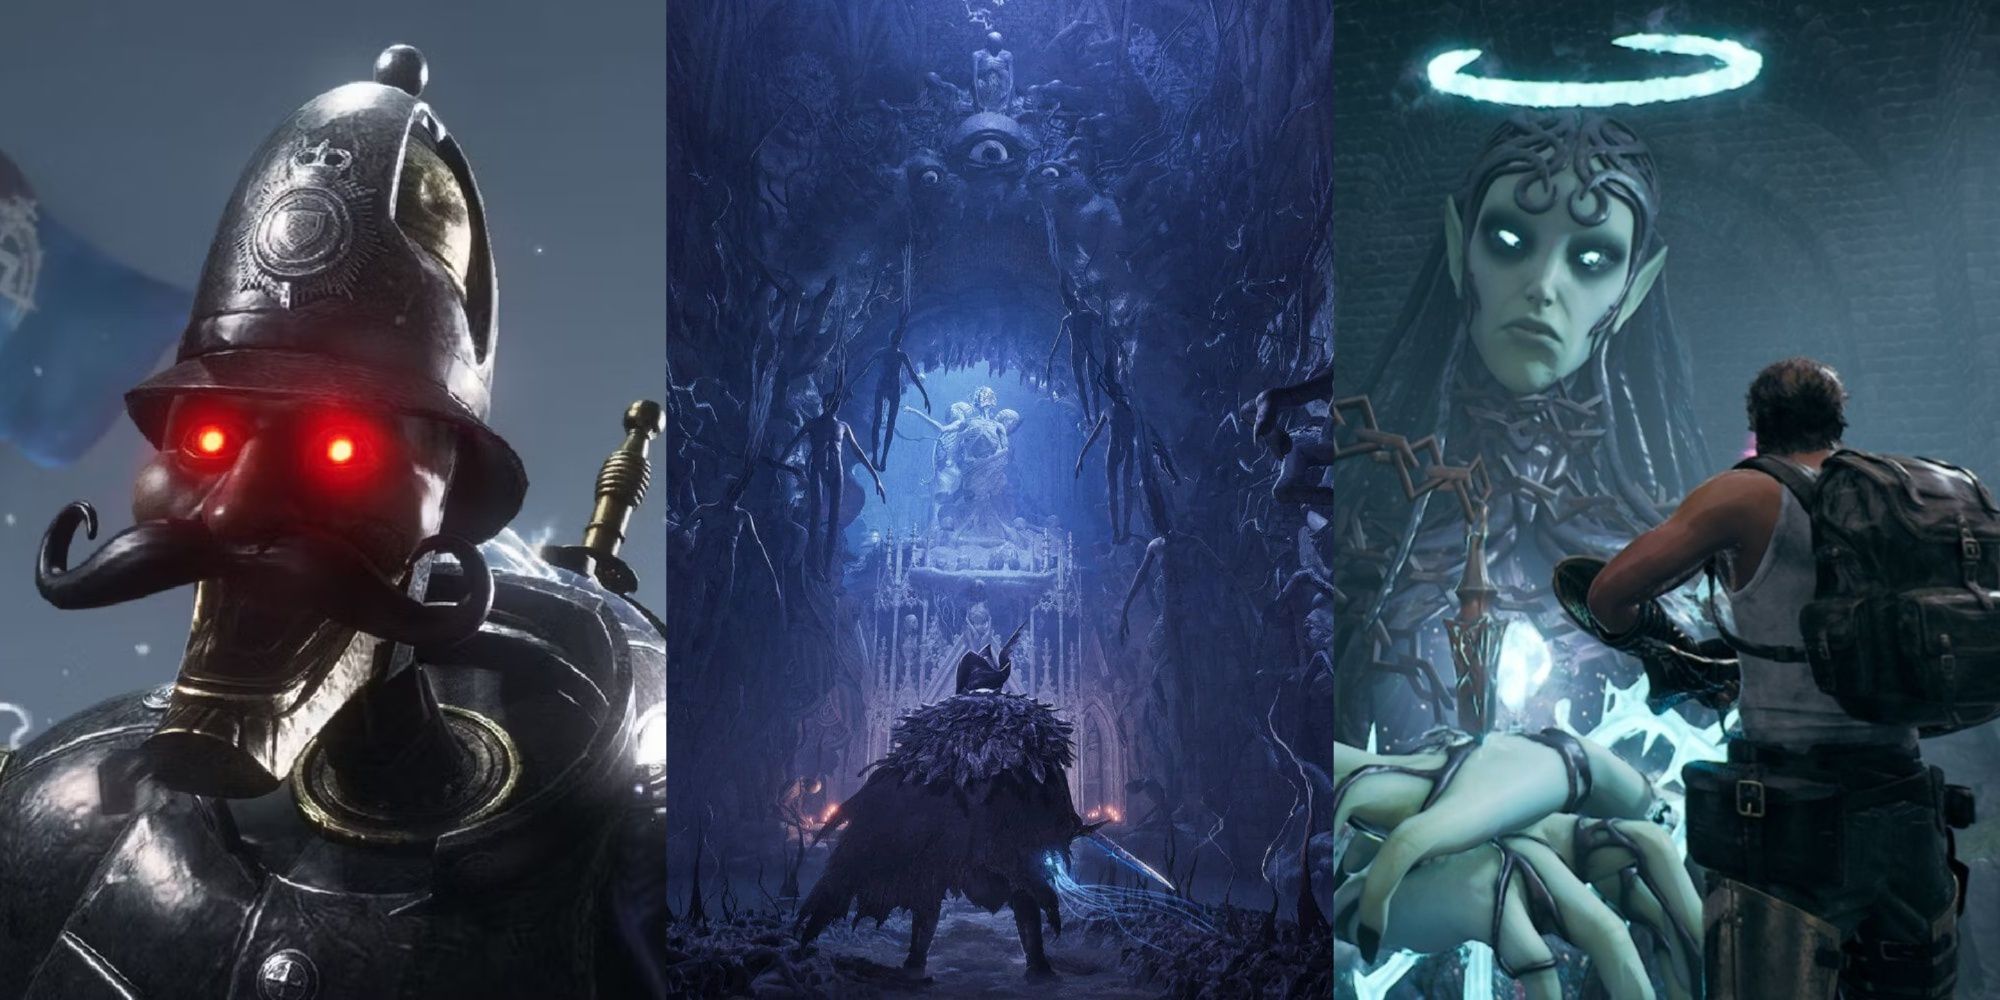 Three-image collage of a close-up of the Scrapped Watchman from Lies of P, the main character build standing in the violet Umbral atmosphere in Lords of the Fallen, and the player approaching Nimue in Remnant 2.